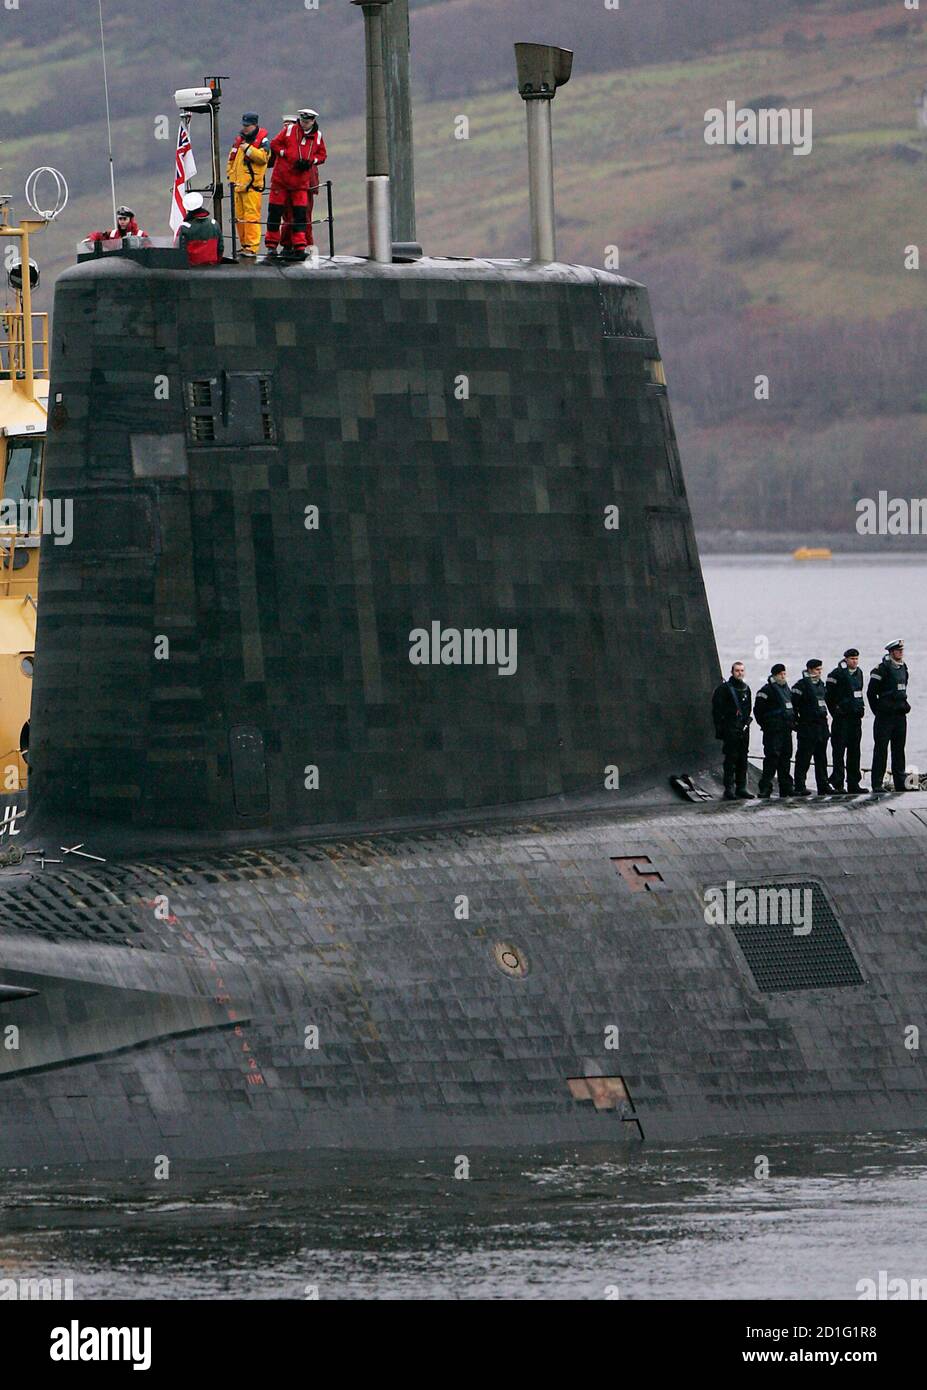 Crew from HMS Vengeance, a British Royal Navy Vanguard class Trident  Ballistic Missile Submarine, look out from the conning tower as they return  along the Clyde river to the Faslane naval base